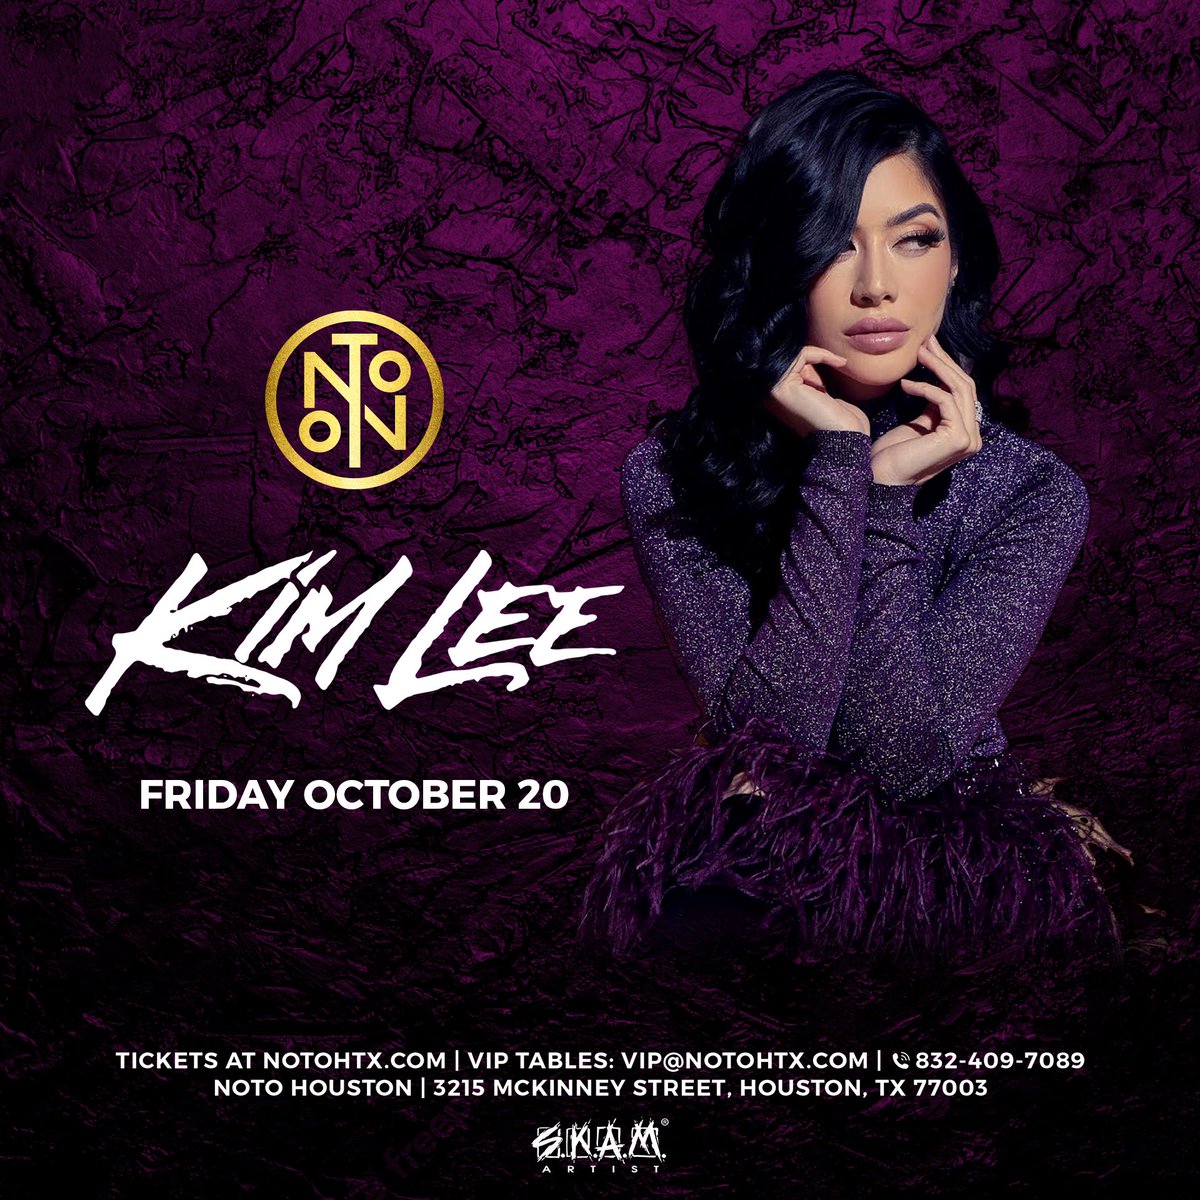 BLING BLING 💎 #BlingEmpire ‘s @kimlee is making her NOTO HTX debut on Friday, October 20th! @skamartist 

Tickets: hive.co/l/notohtx102023
Tables: hive.co/l/notohtxtables

#notohtx #houstonnightlife #houston